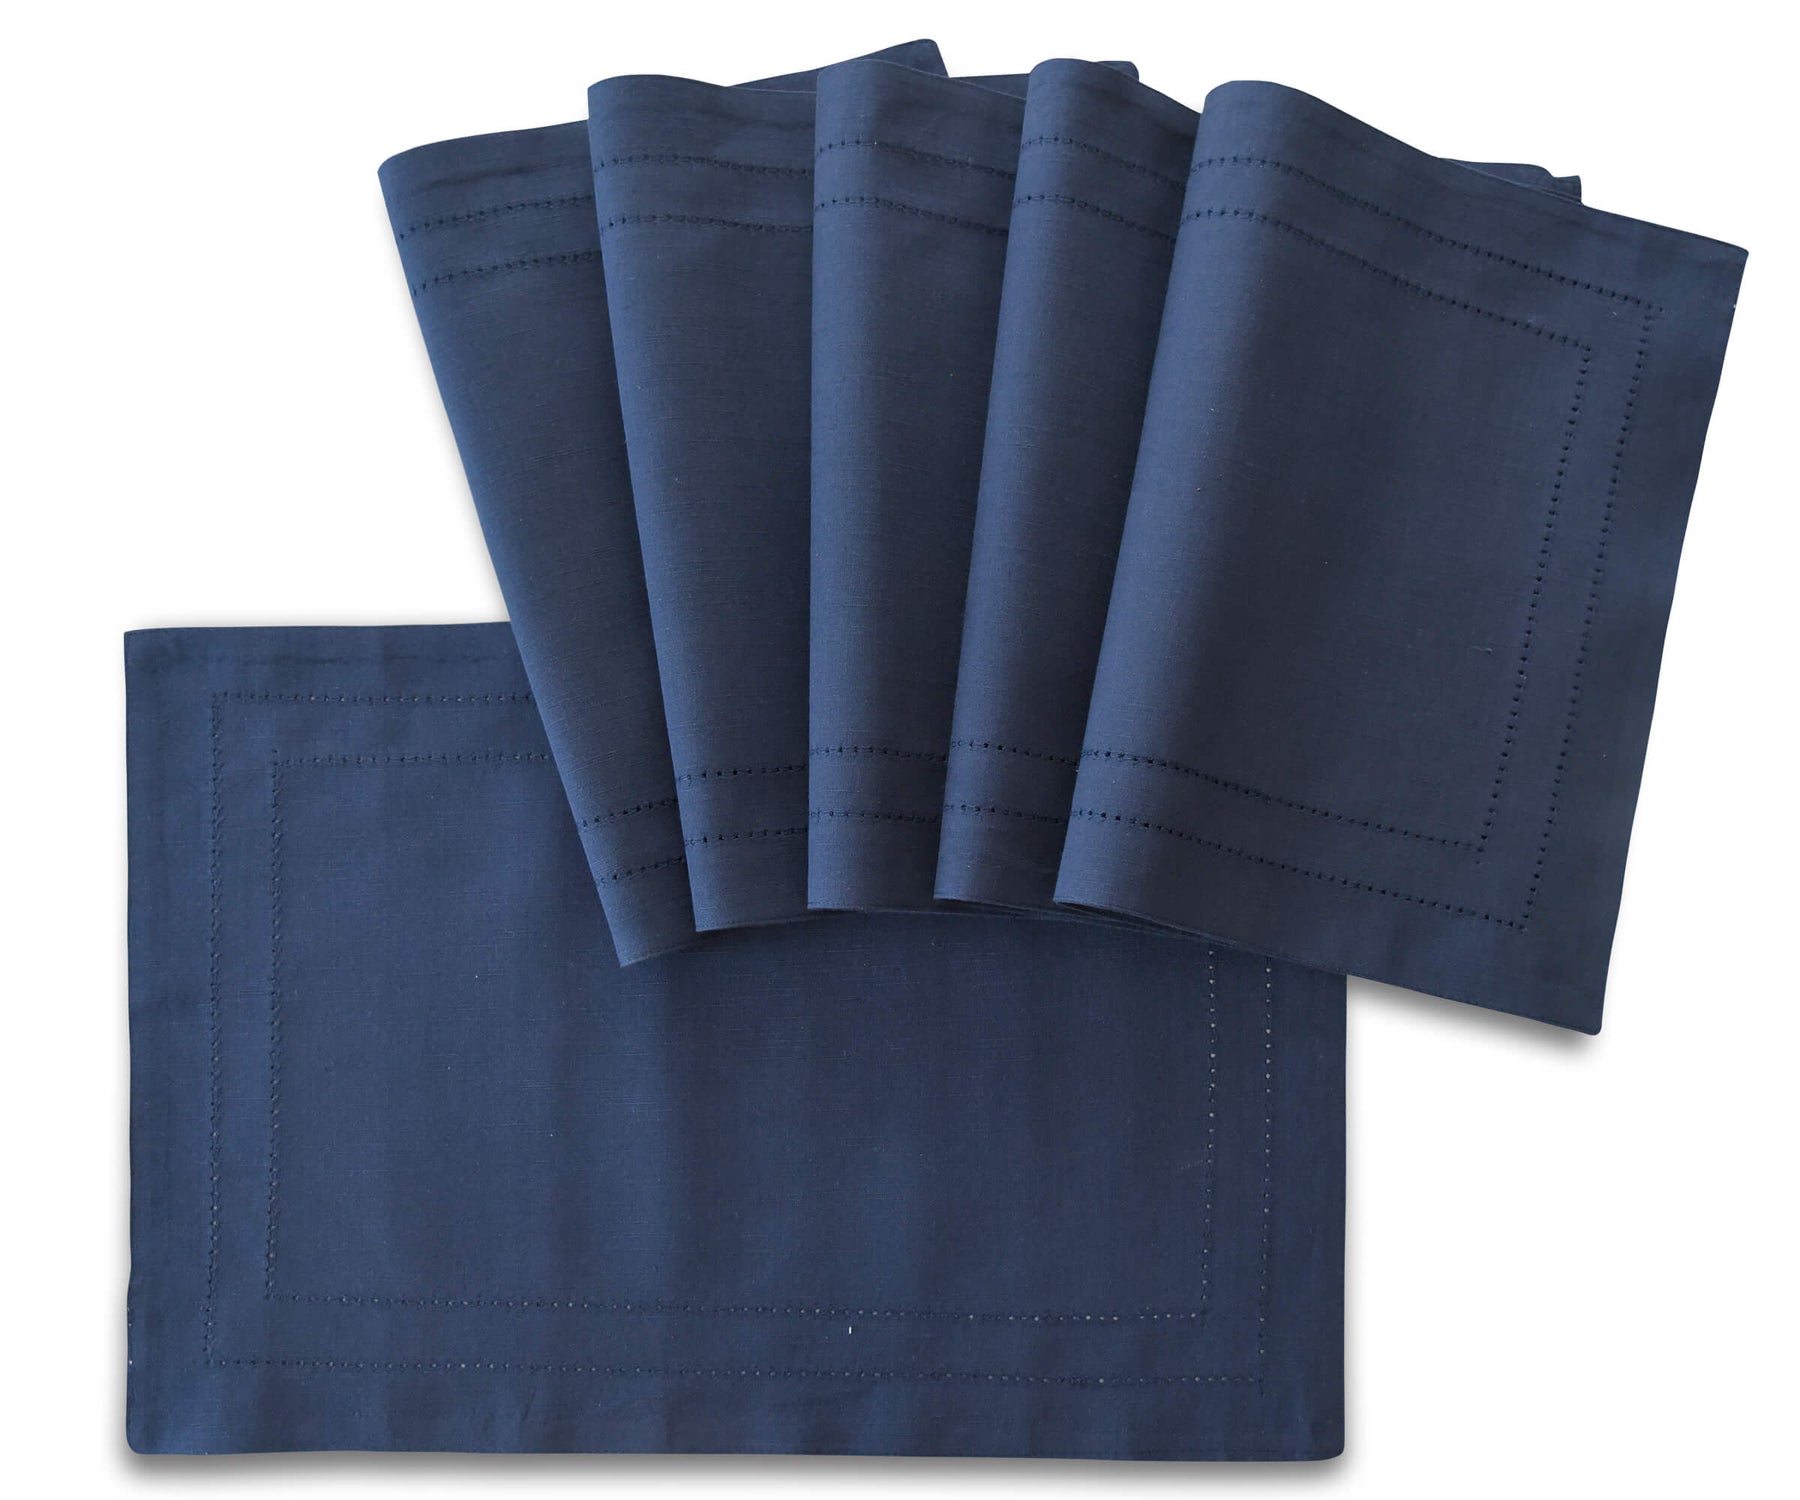 Folded rectangular dinning table placemats of size 13×18",a set of 6 hem stitched navy blue table placemats are arranged one above another.